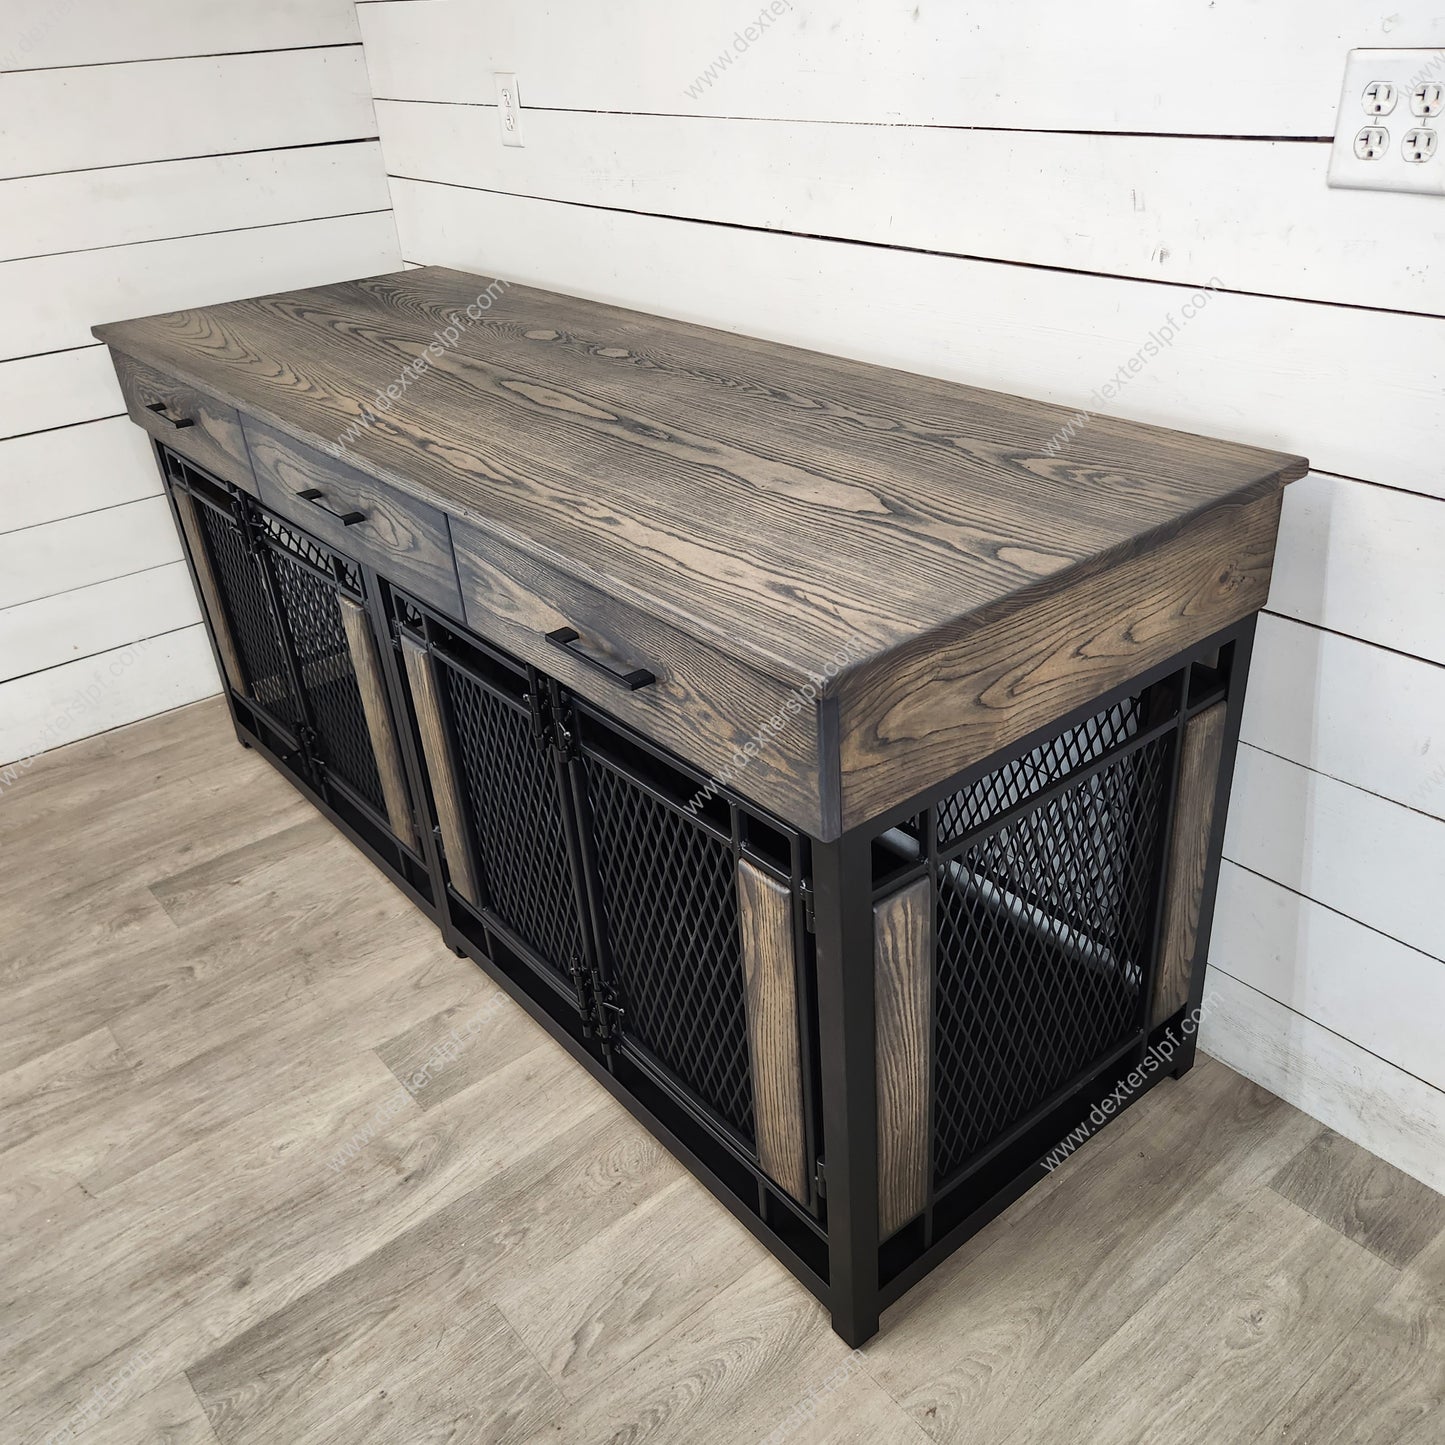 Raven Large Double Dog Kennel, 3 Drawers